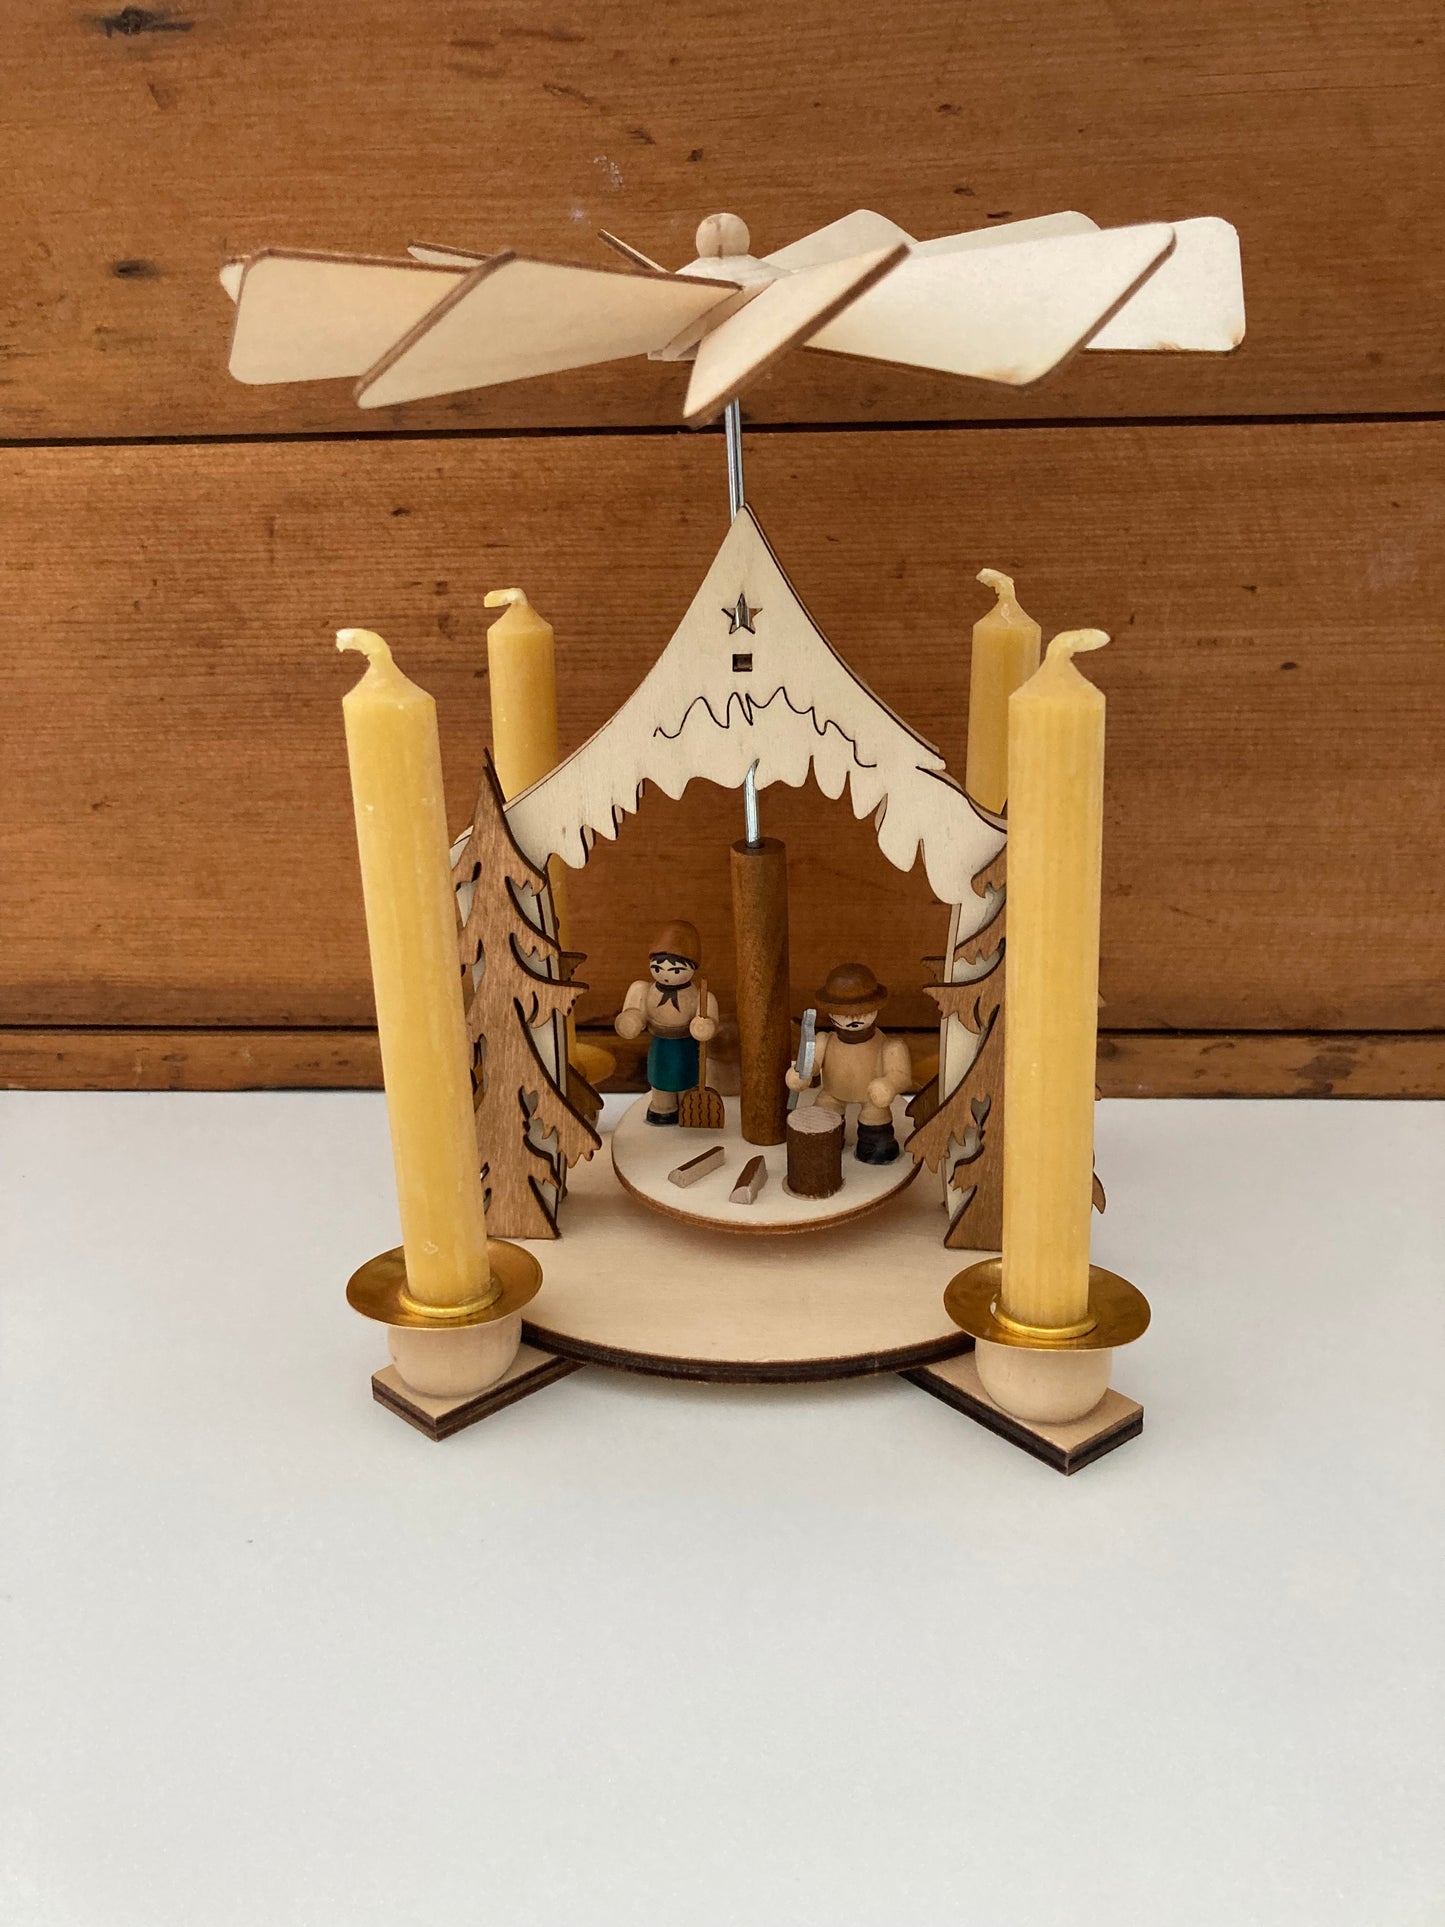 Beeswax Candle Wooden Carousel - WOODCUTTER FAMILY, with 4 Beeswax Candles!